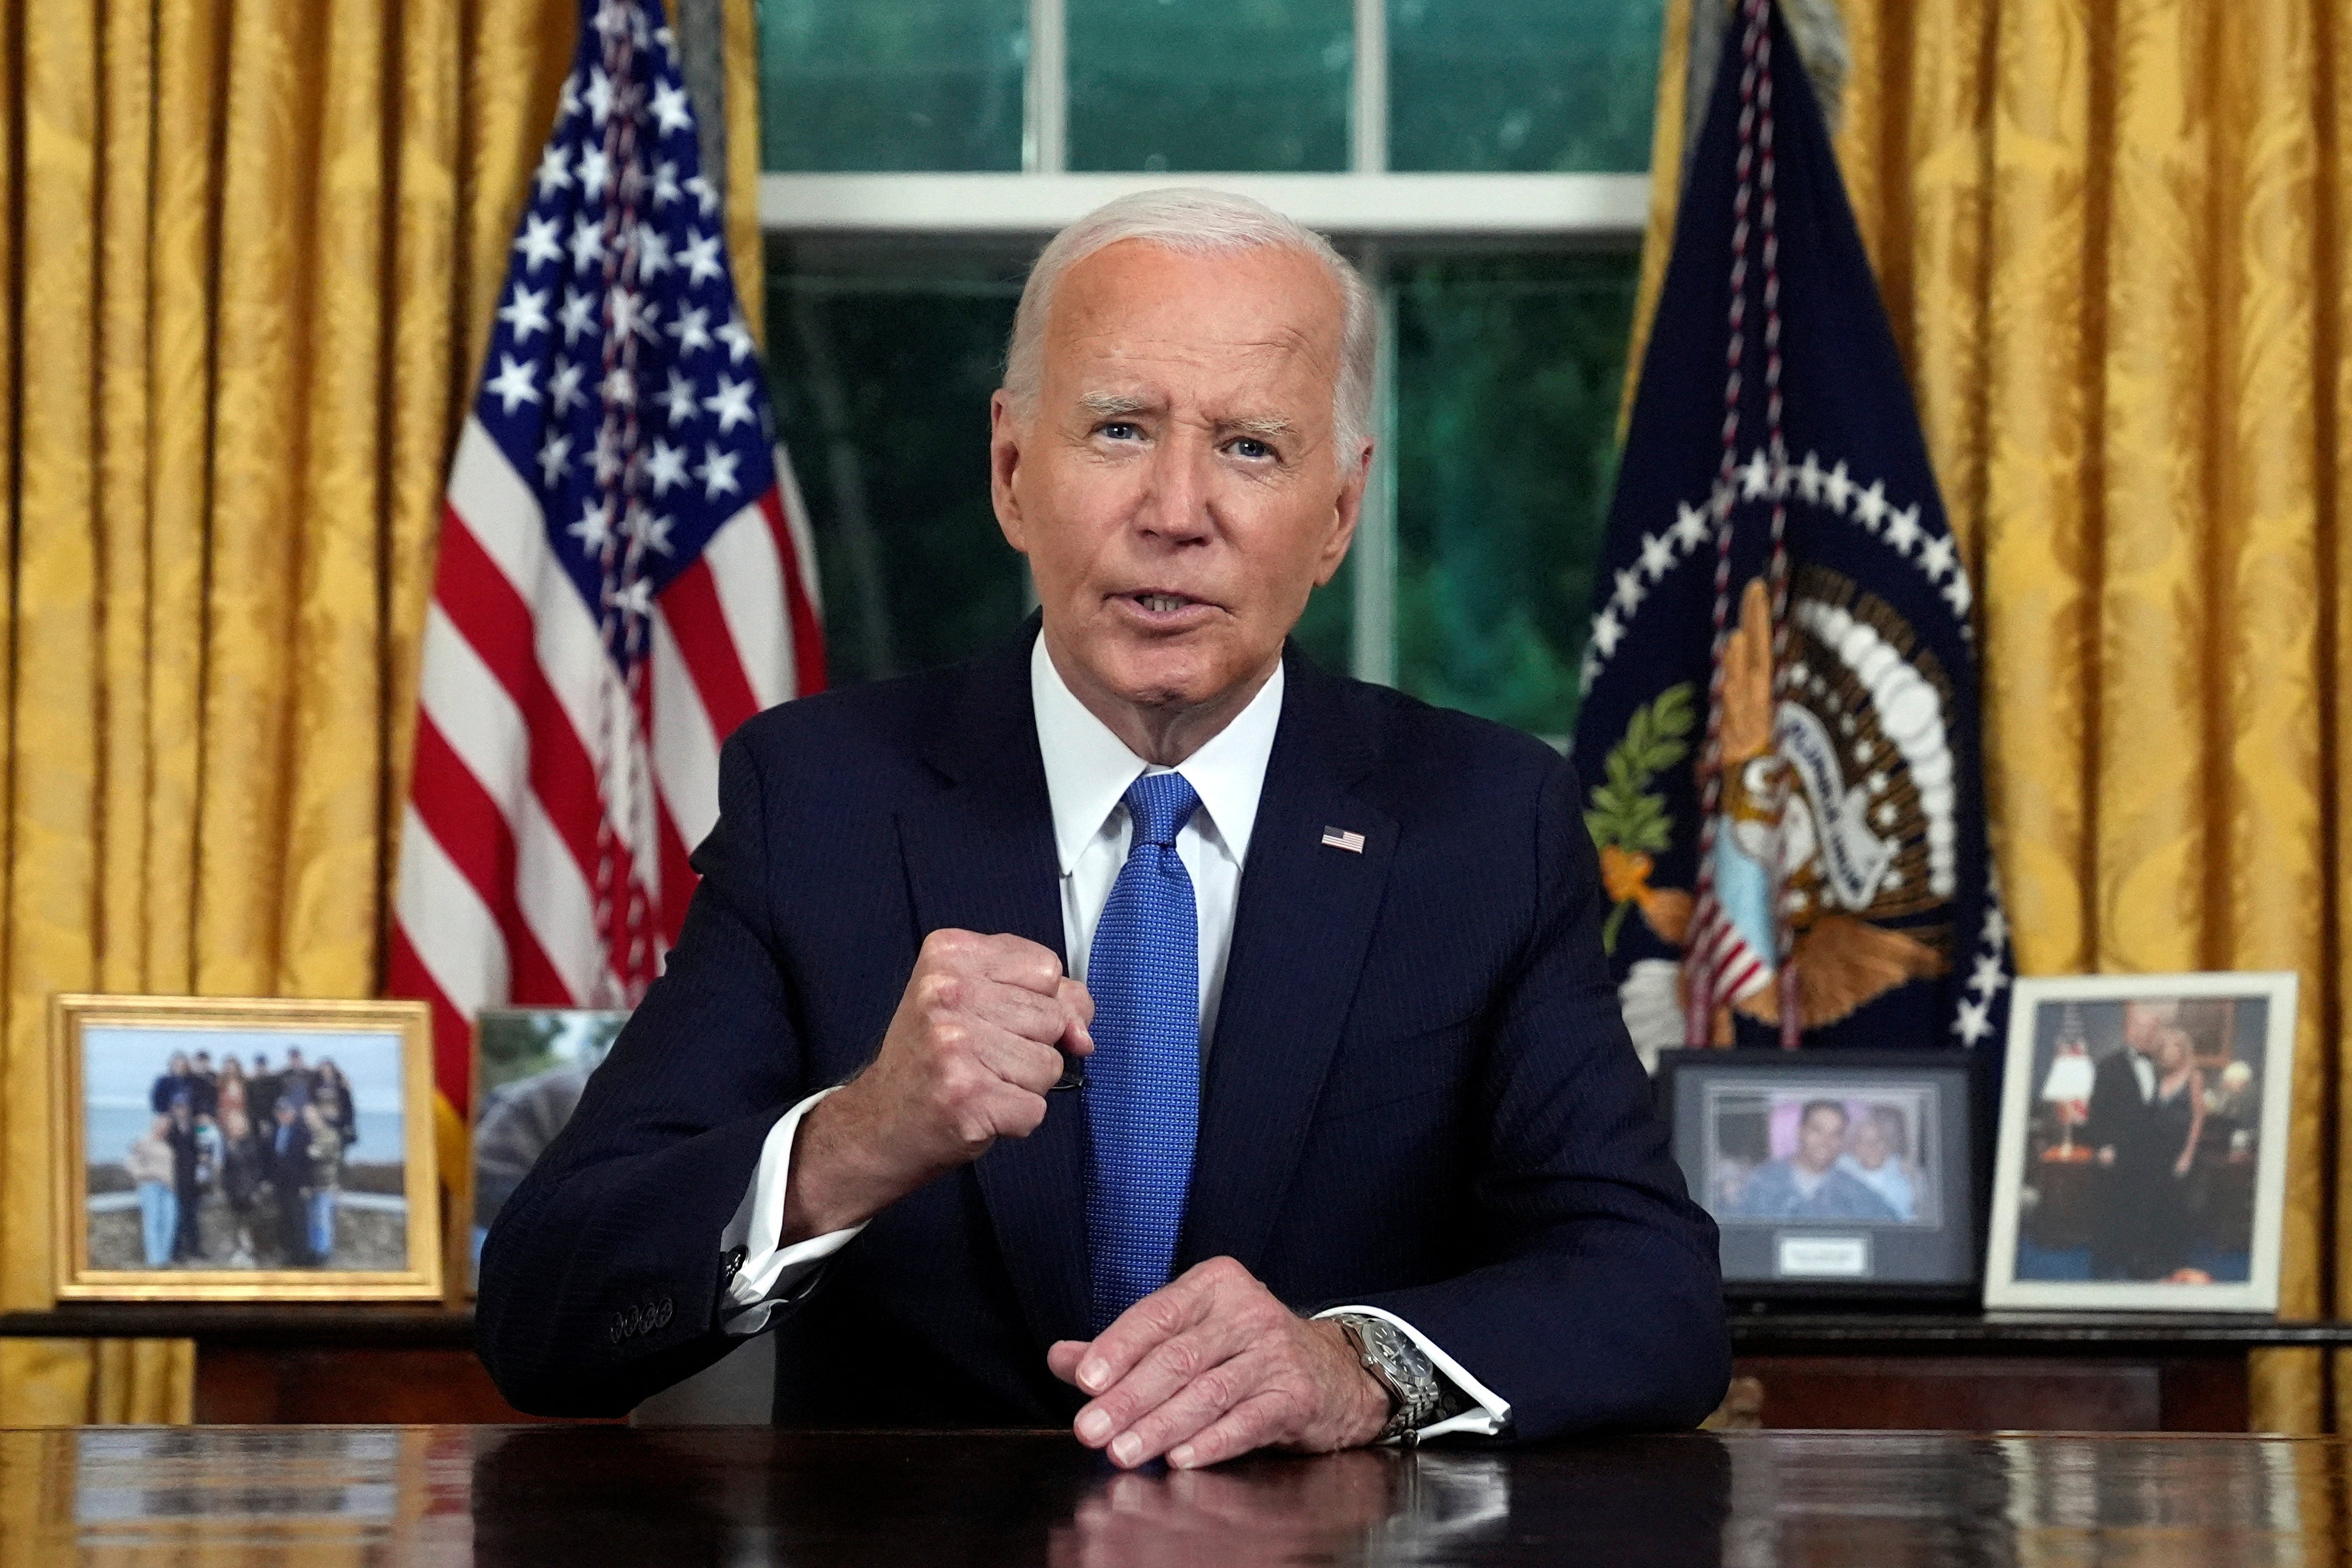 Wasn’t There Something Important Missing From Biden’s Big Speech About Dropping Out?